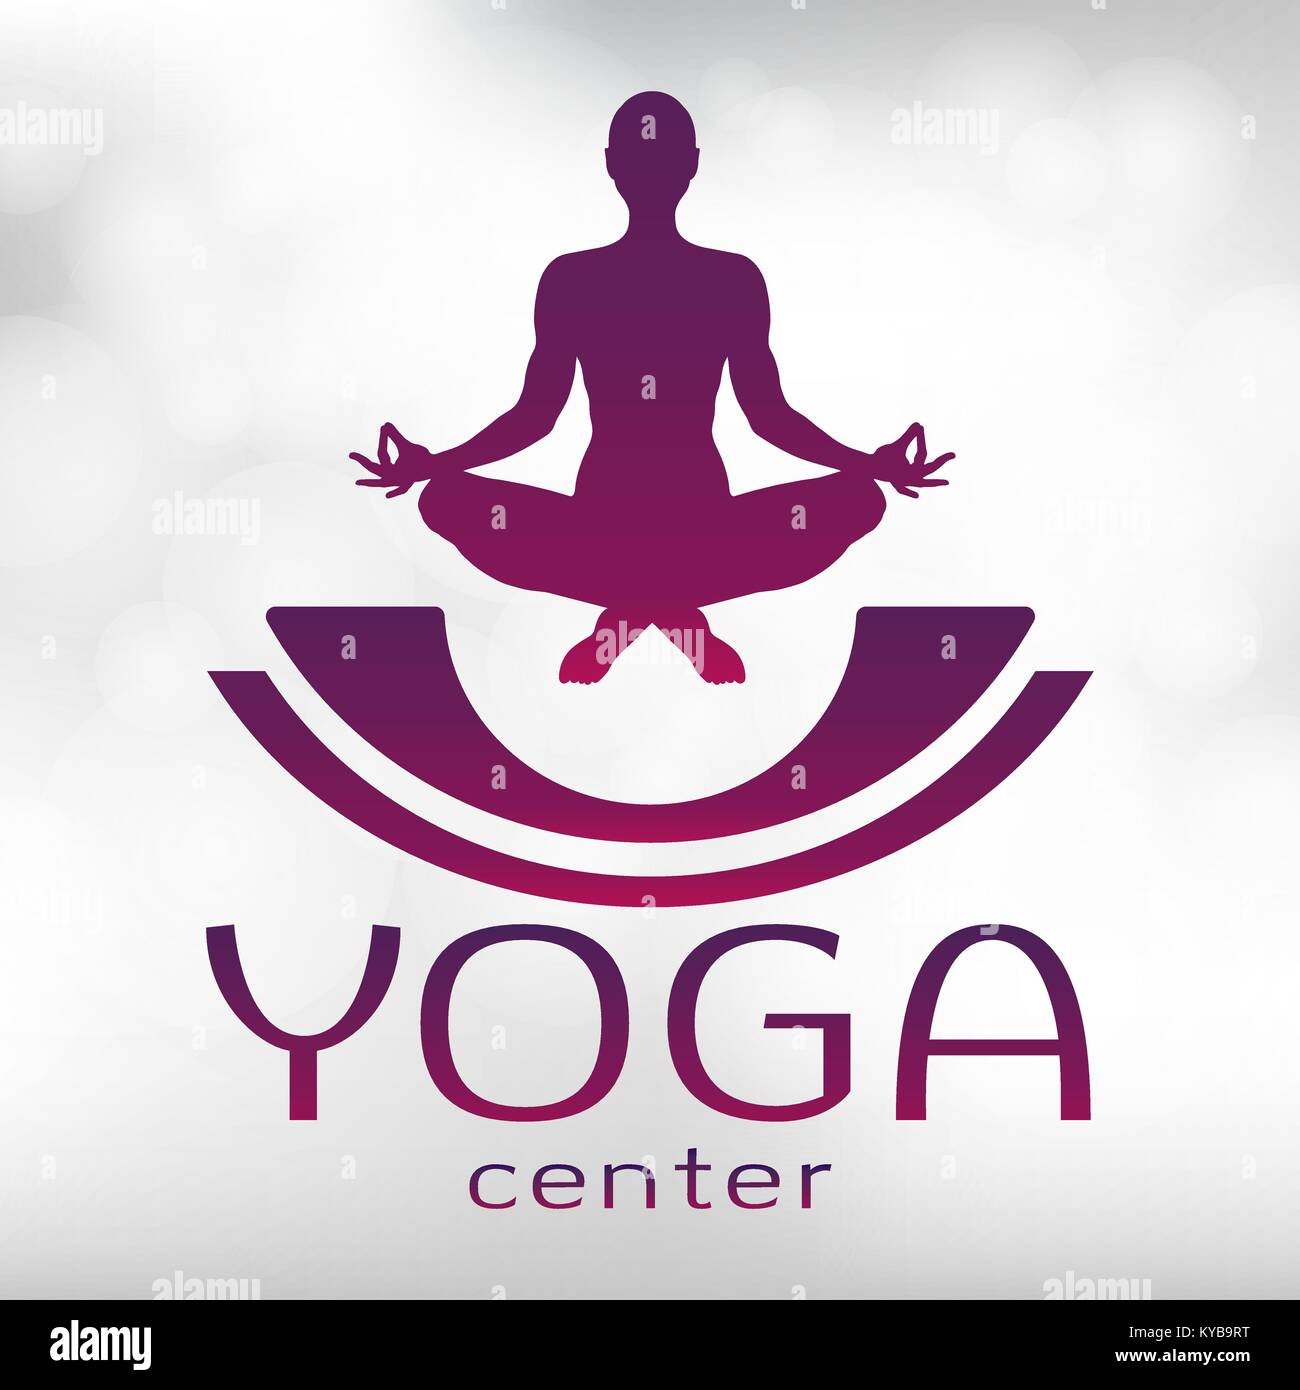 Yoga logo, vector icon, emblem for yoga center. Figure of a man sitting in a lotus pose, vector silhouette. Meditation relaxation human with a font on a textured light background with highlights Stock Vector